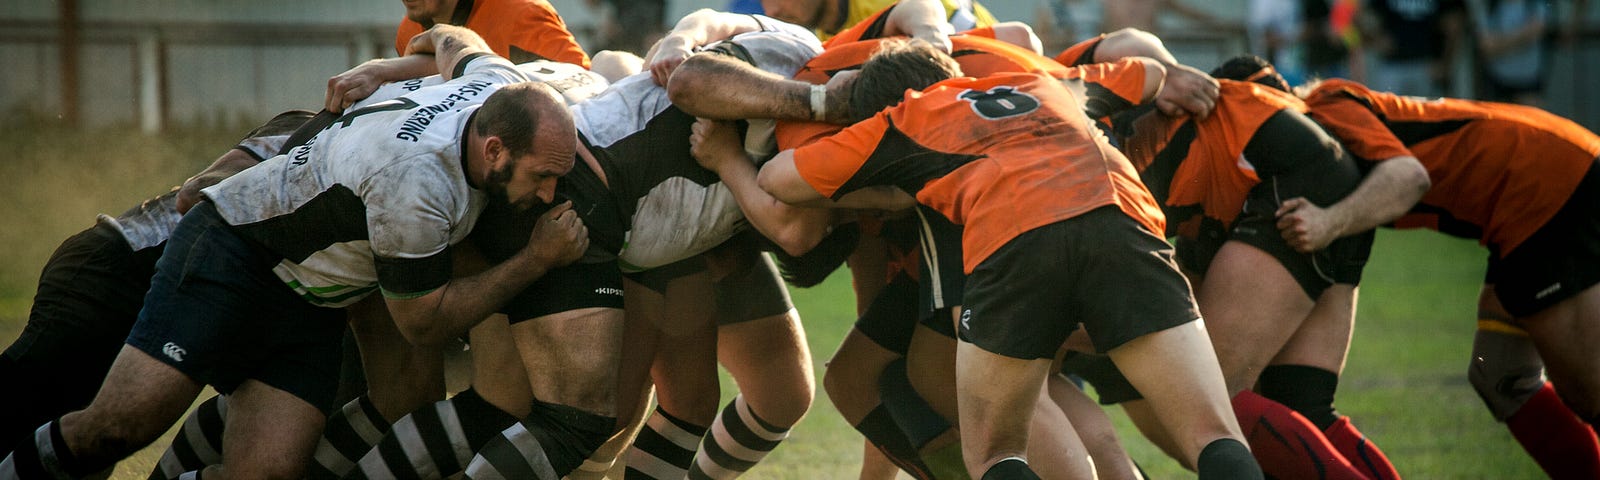 Rugby teams go head to head in a scrum